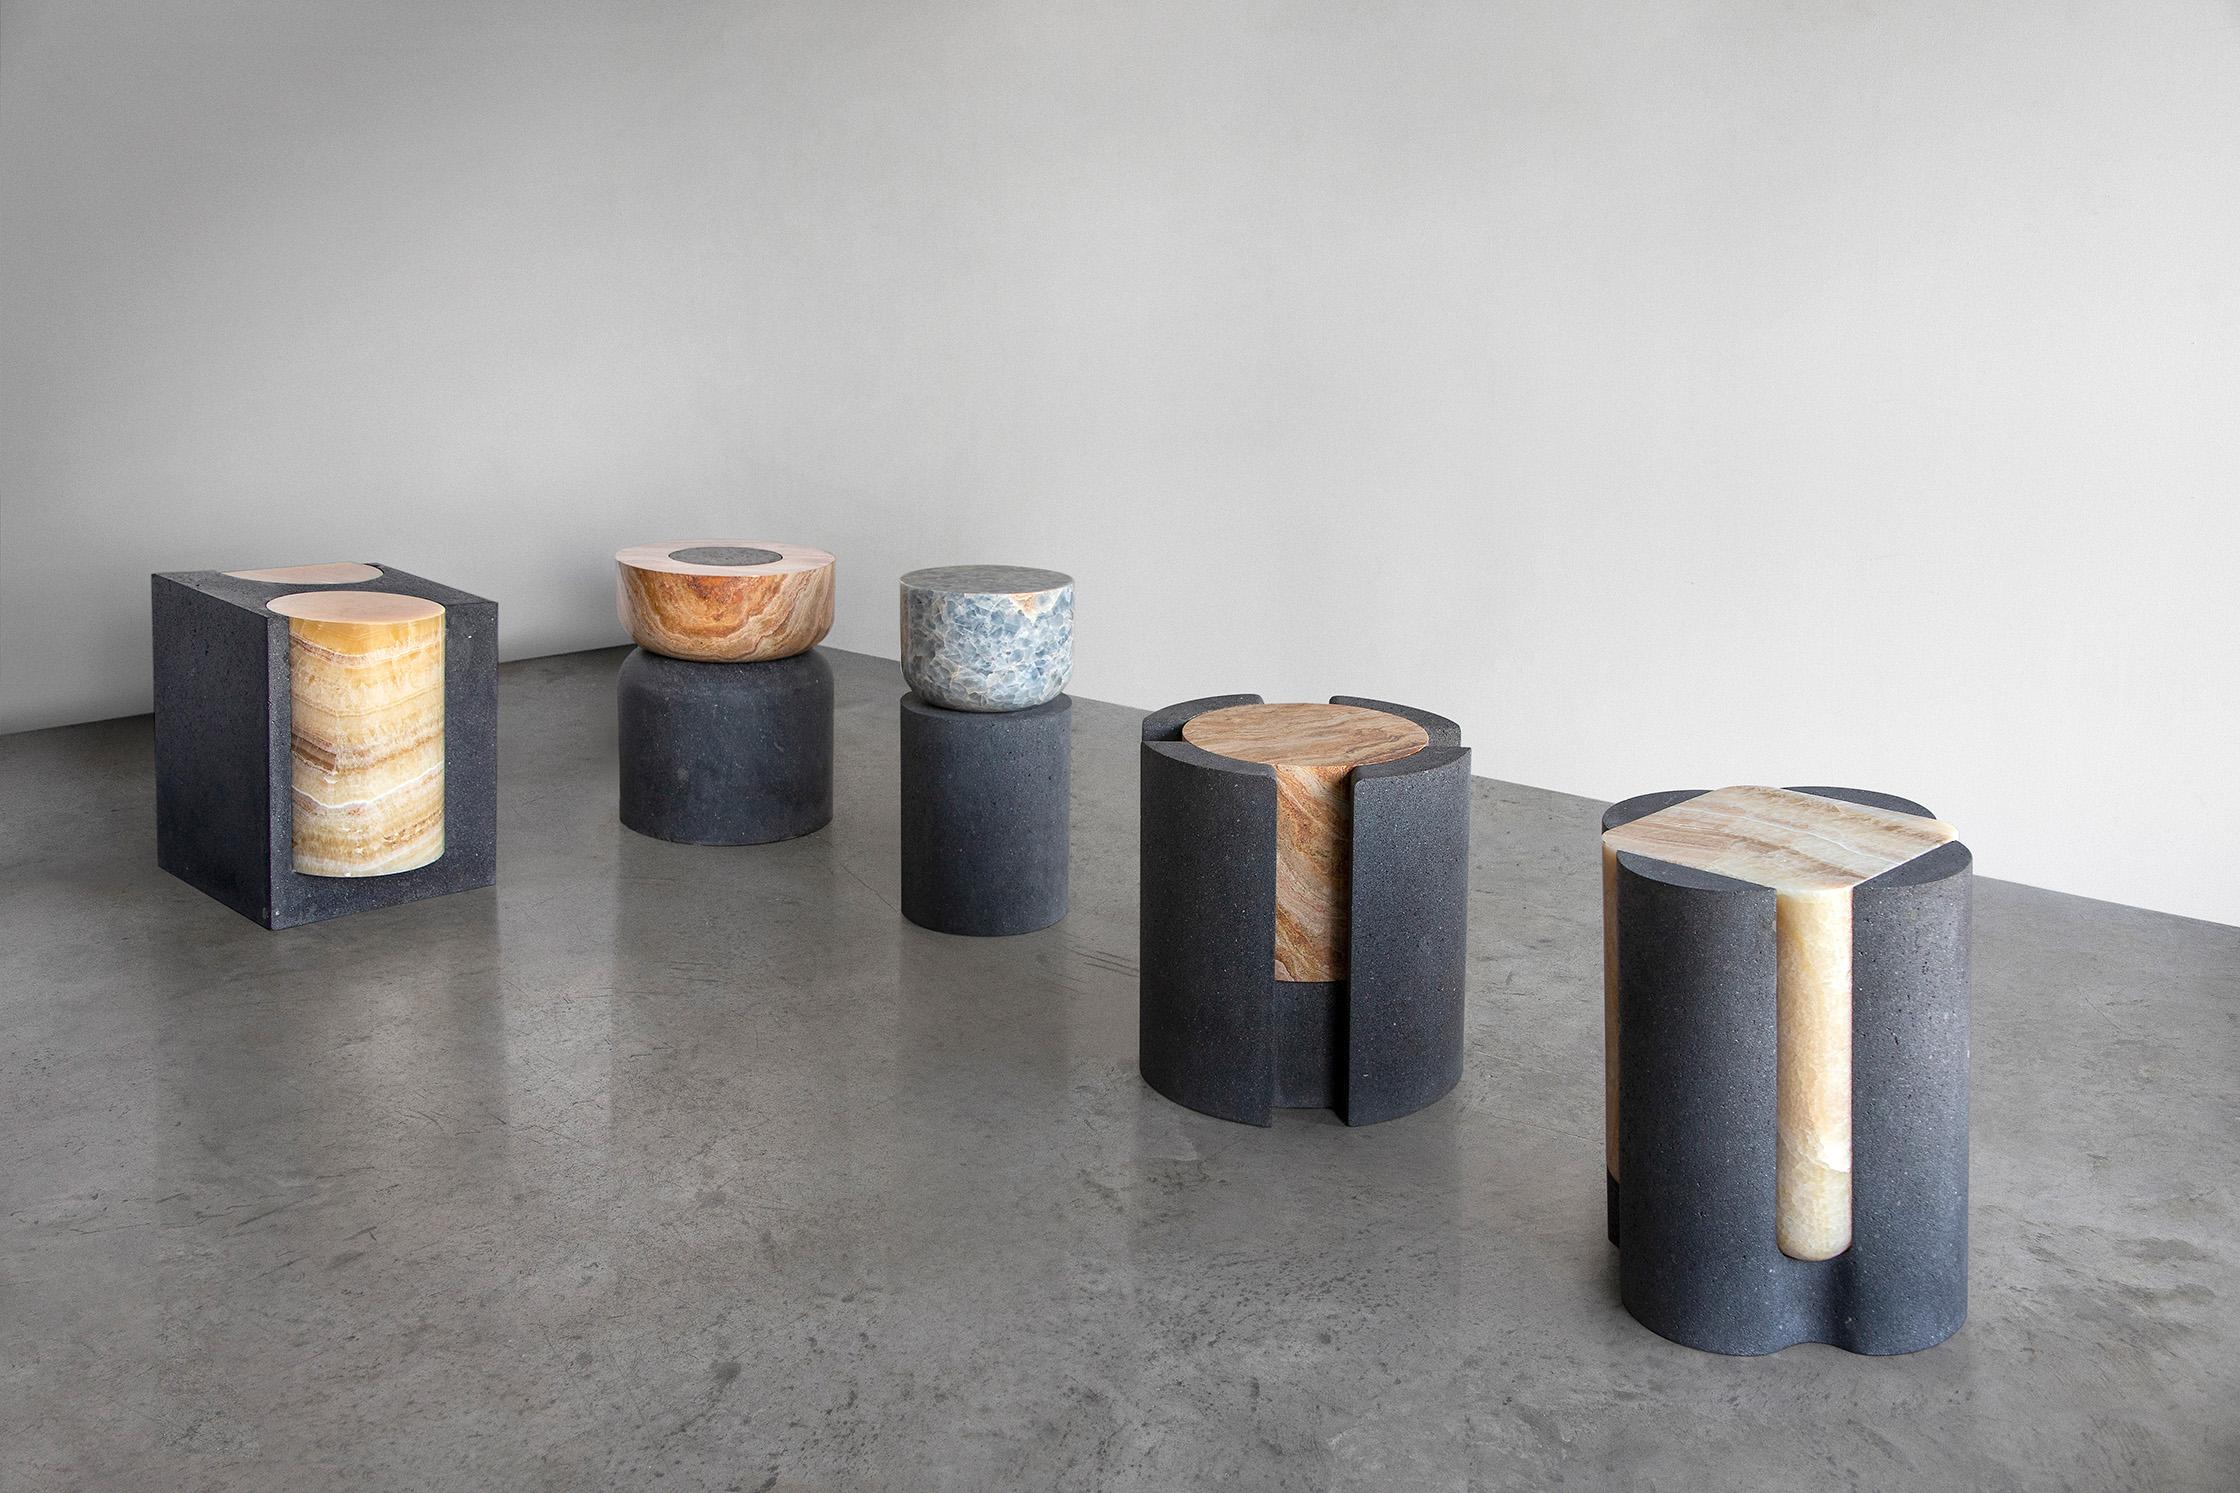 Mexican Volcanic Shade IV Stool/Table by Sten Studio, Represented by Tuleste Factory